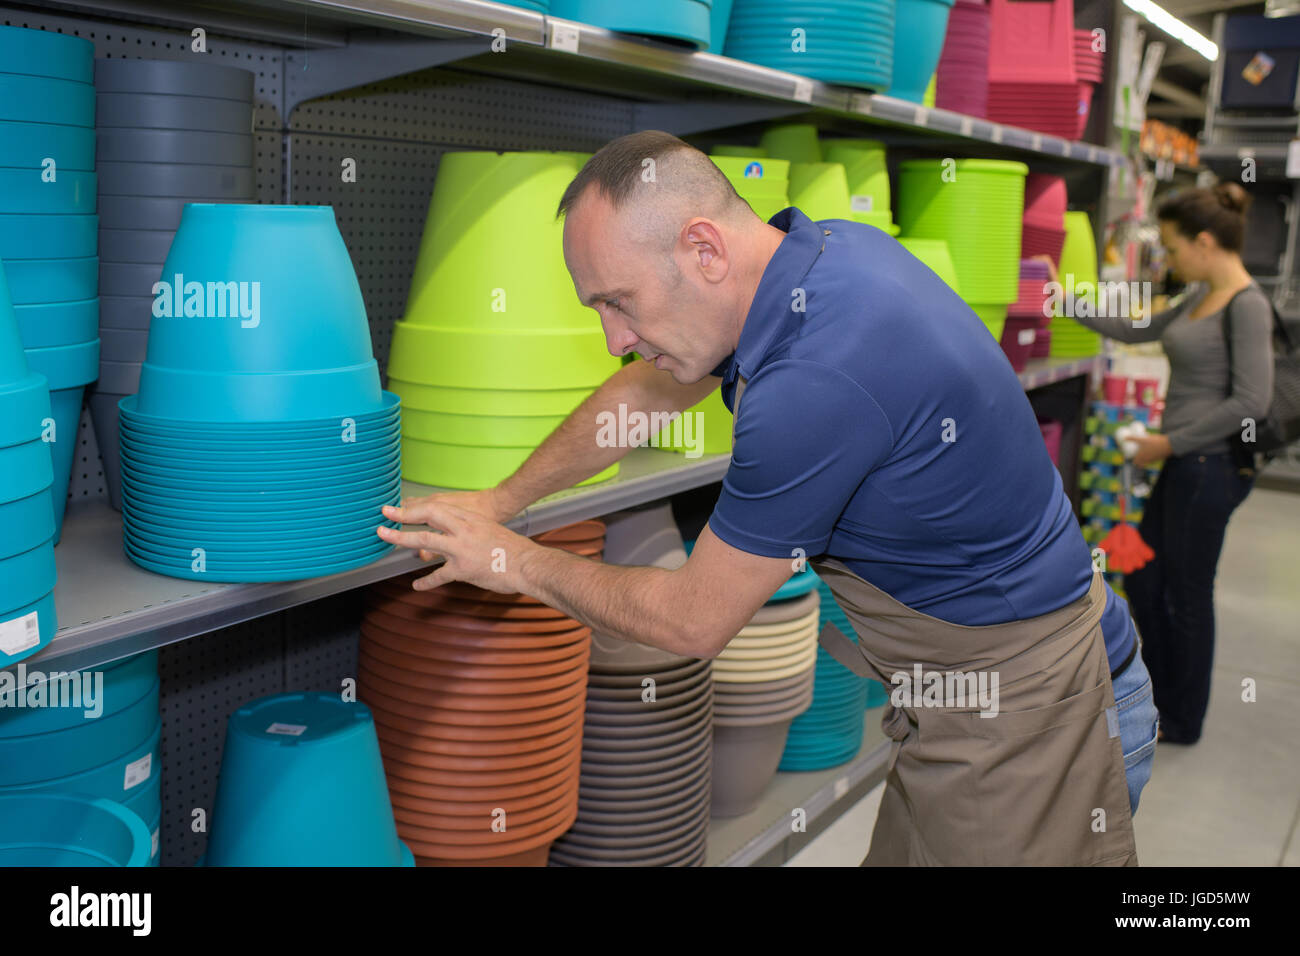 man tidying up colorful pots at a shope Stock Photo